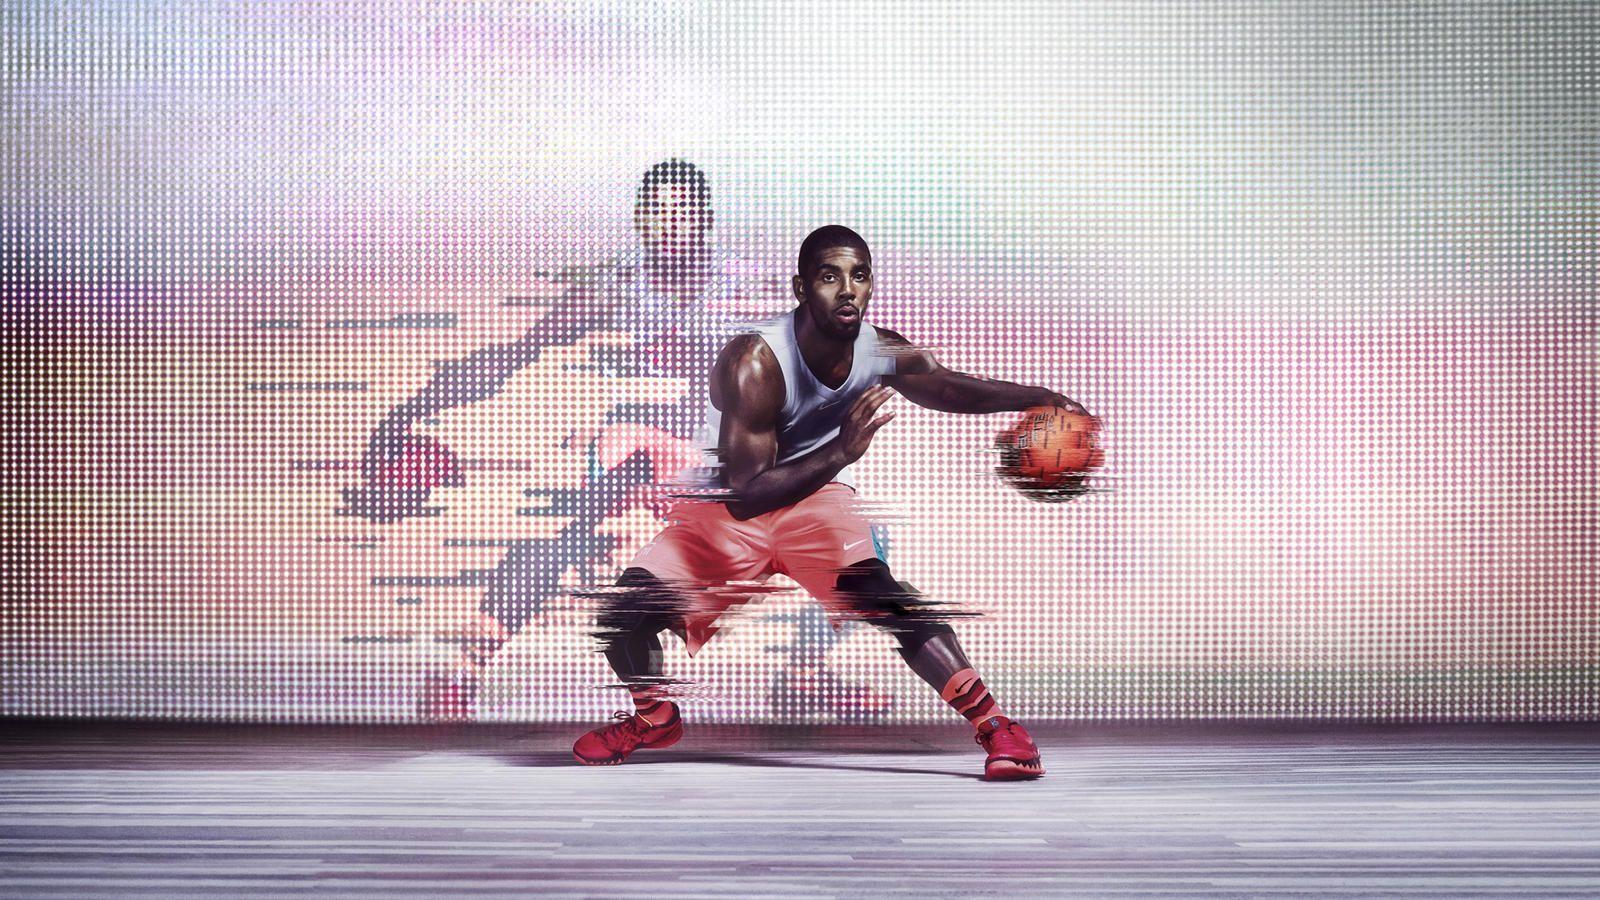 Nike News Welcomes Kyrie Irving to its Esteemed Signature